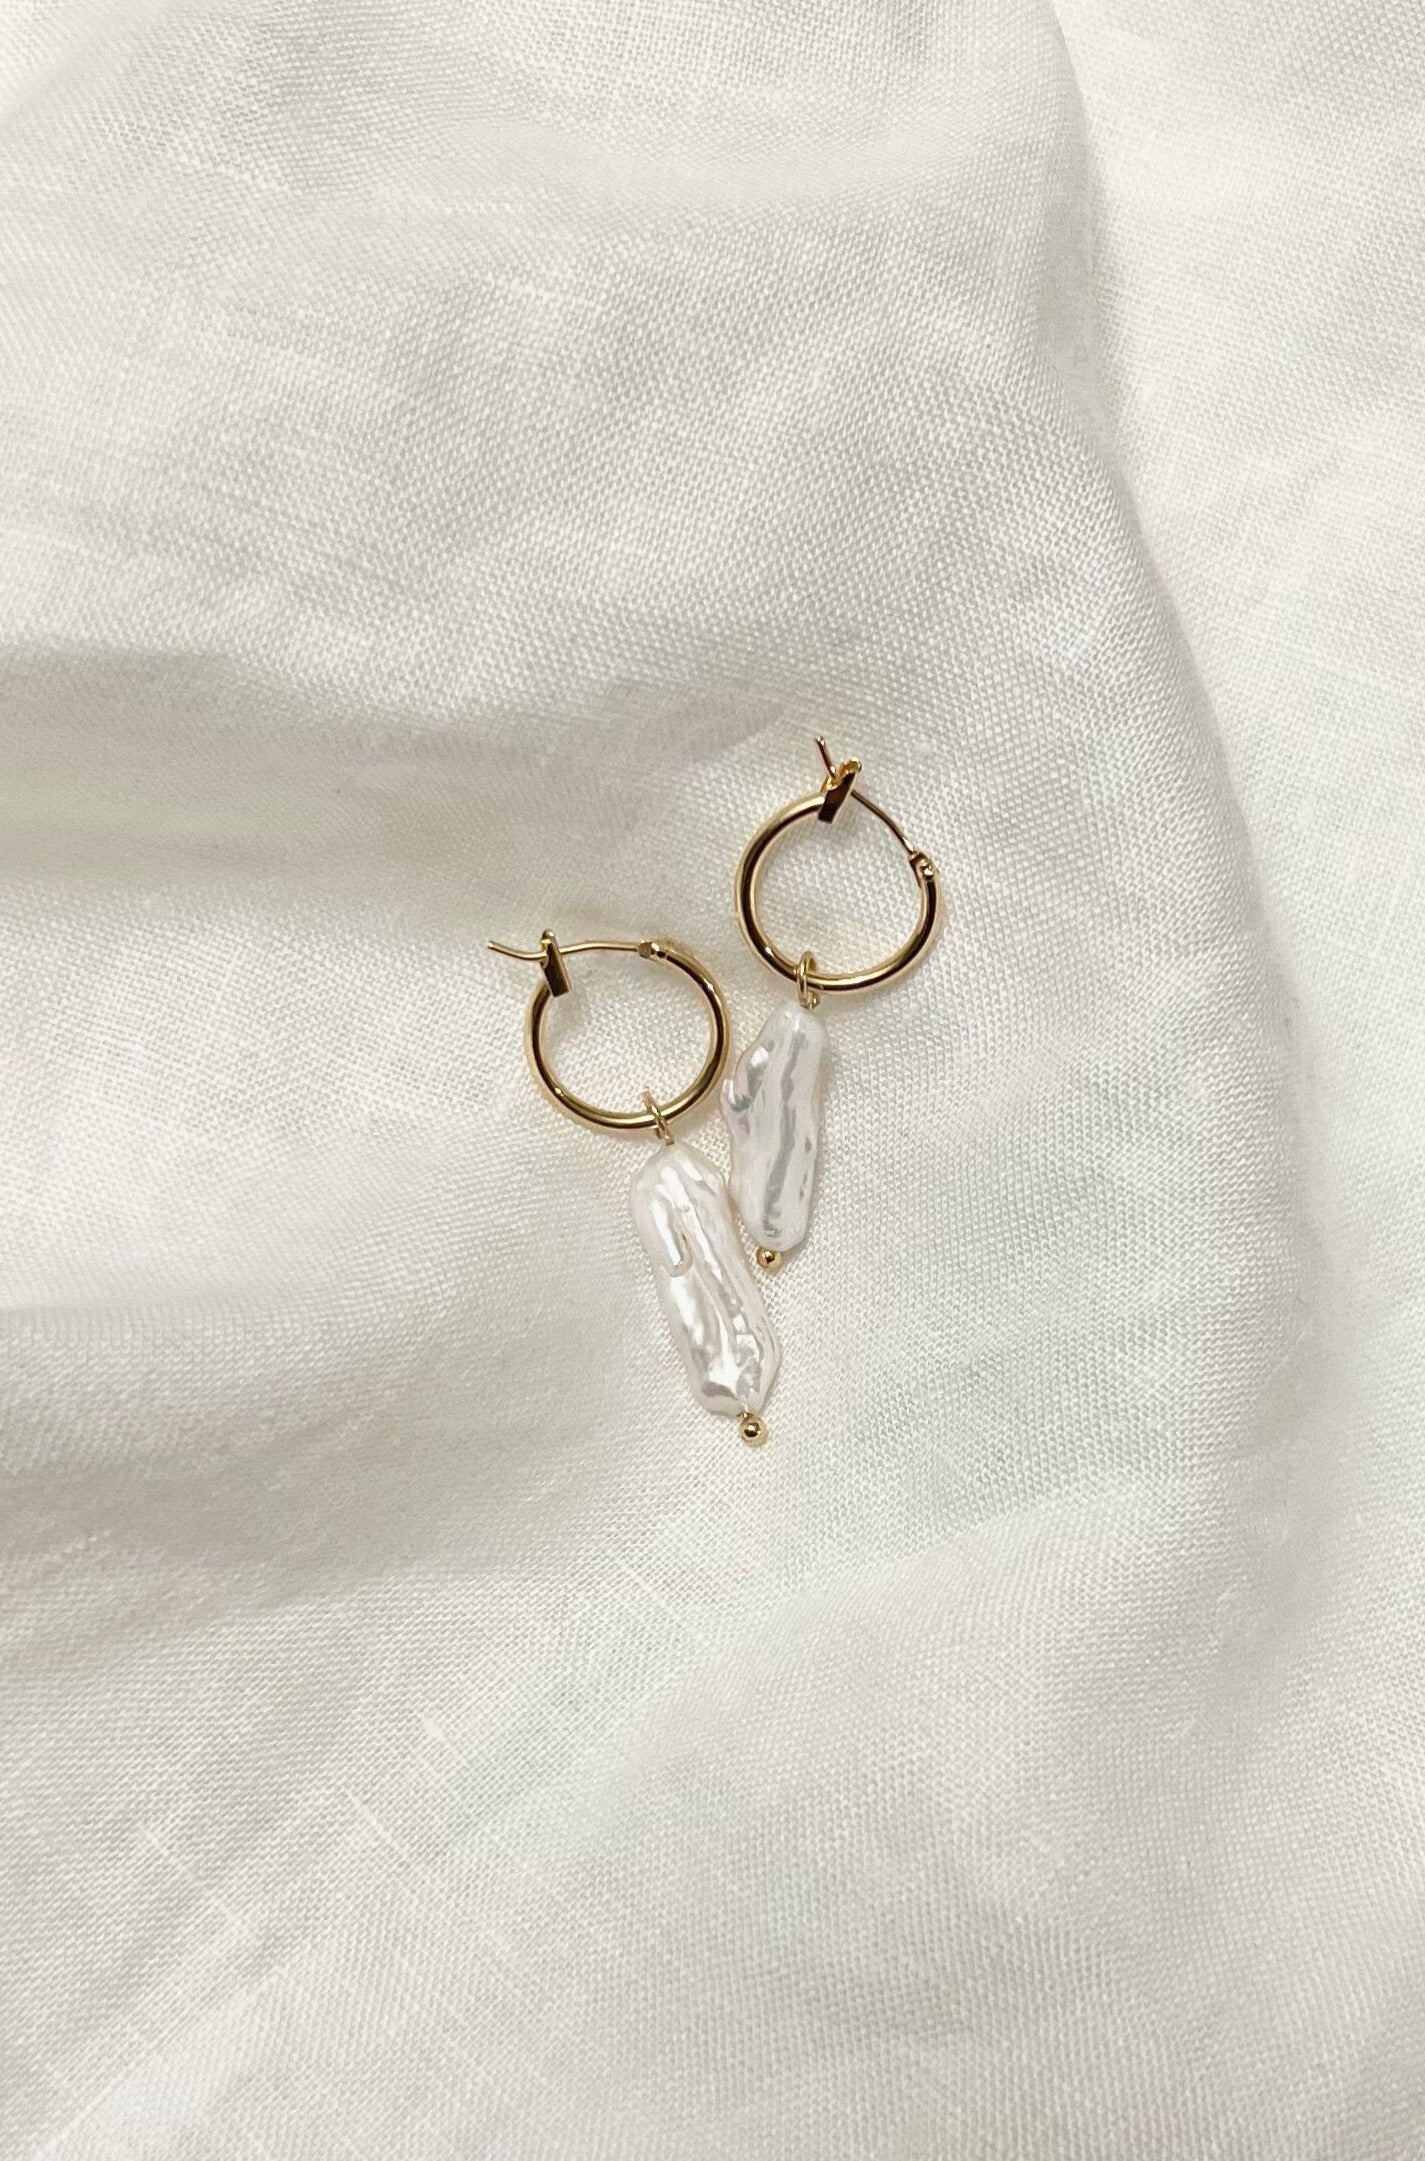 Top view of the earrings, placed on a white linen.